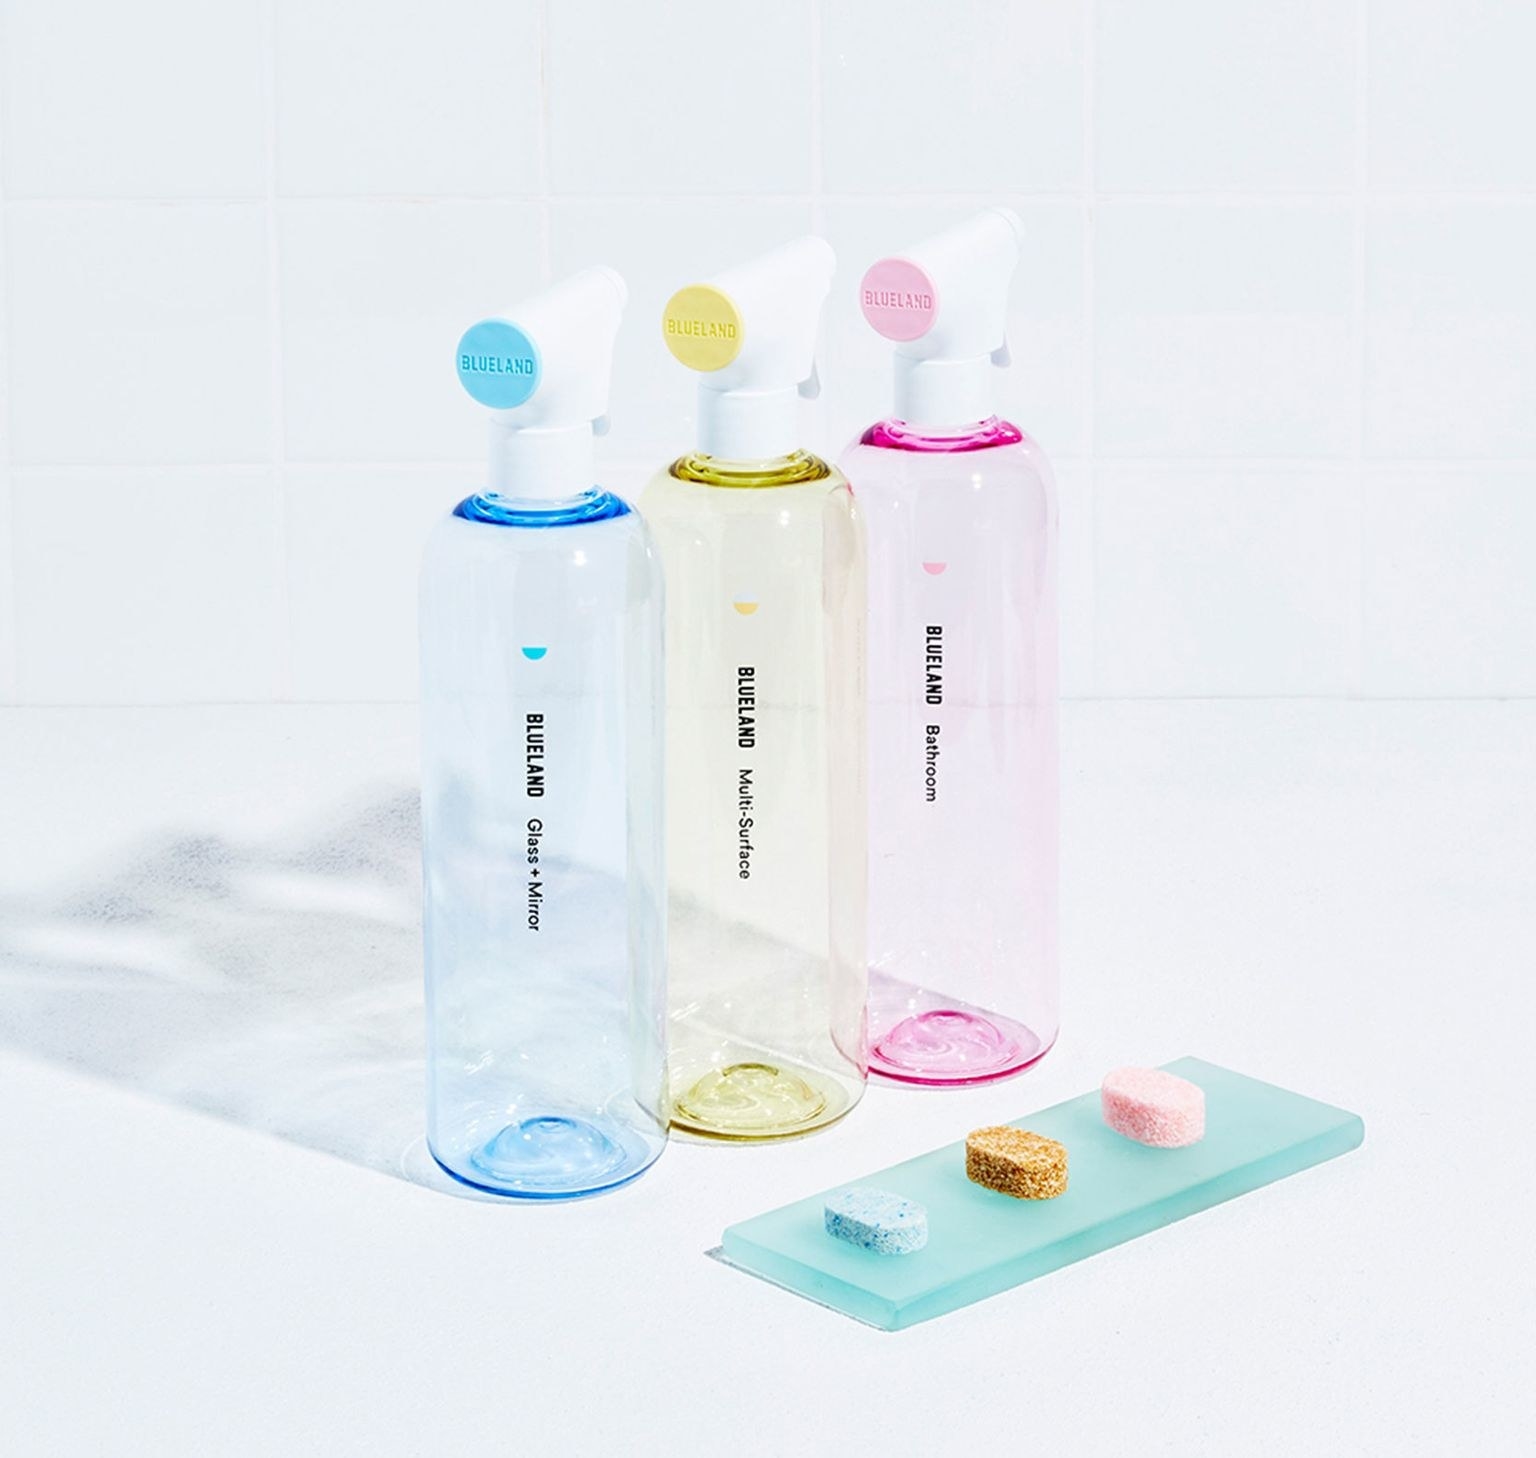 three plastic bottles — one blue, one yellow, and one pink — next to three dissolvable cleaning tablets